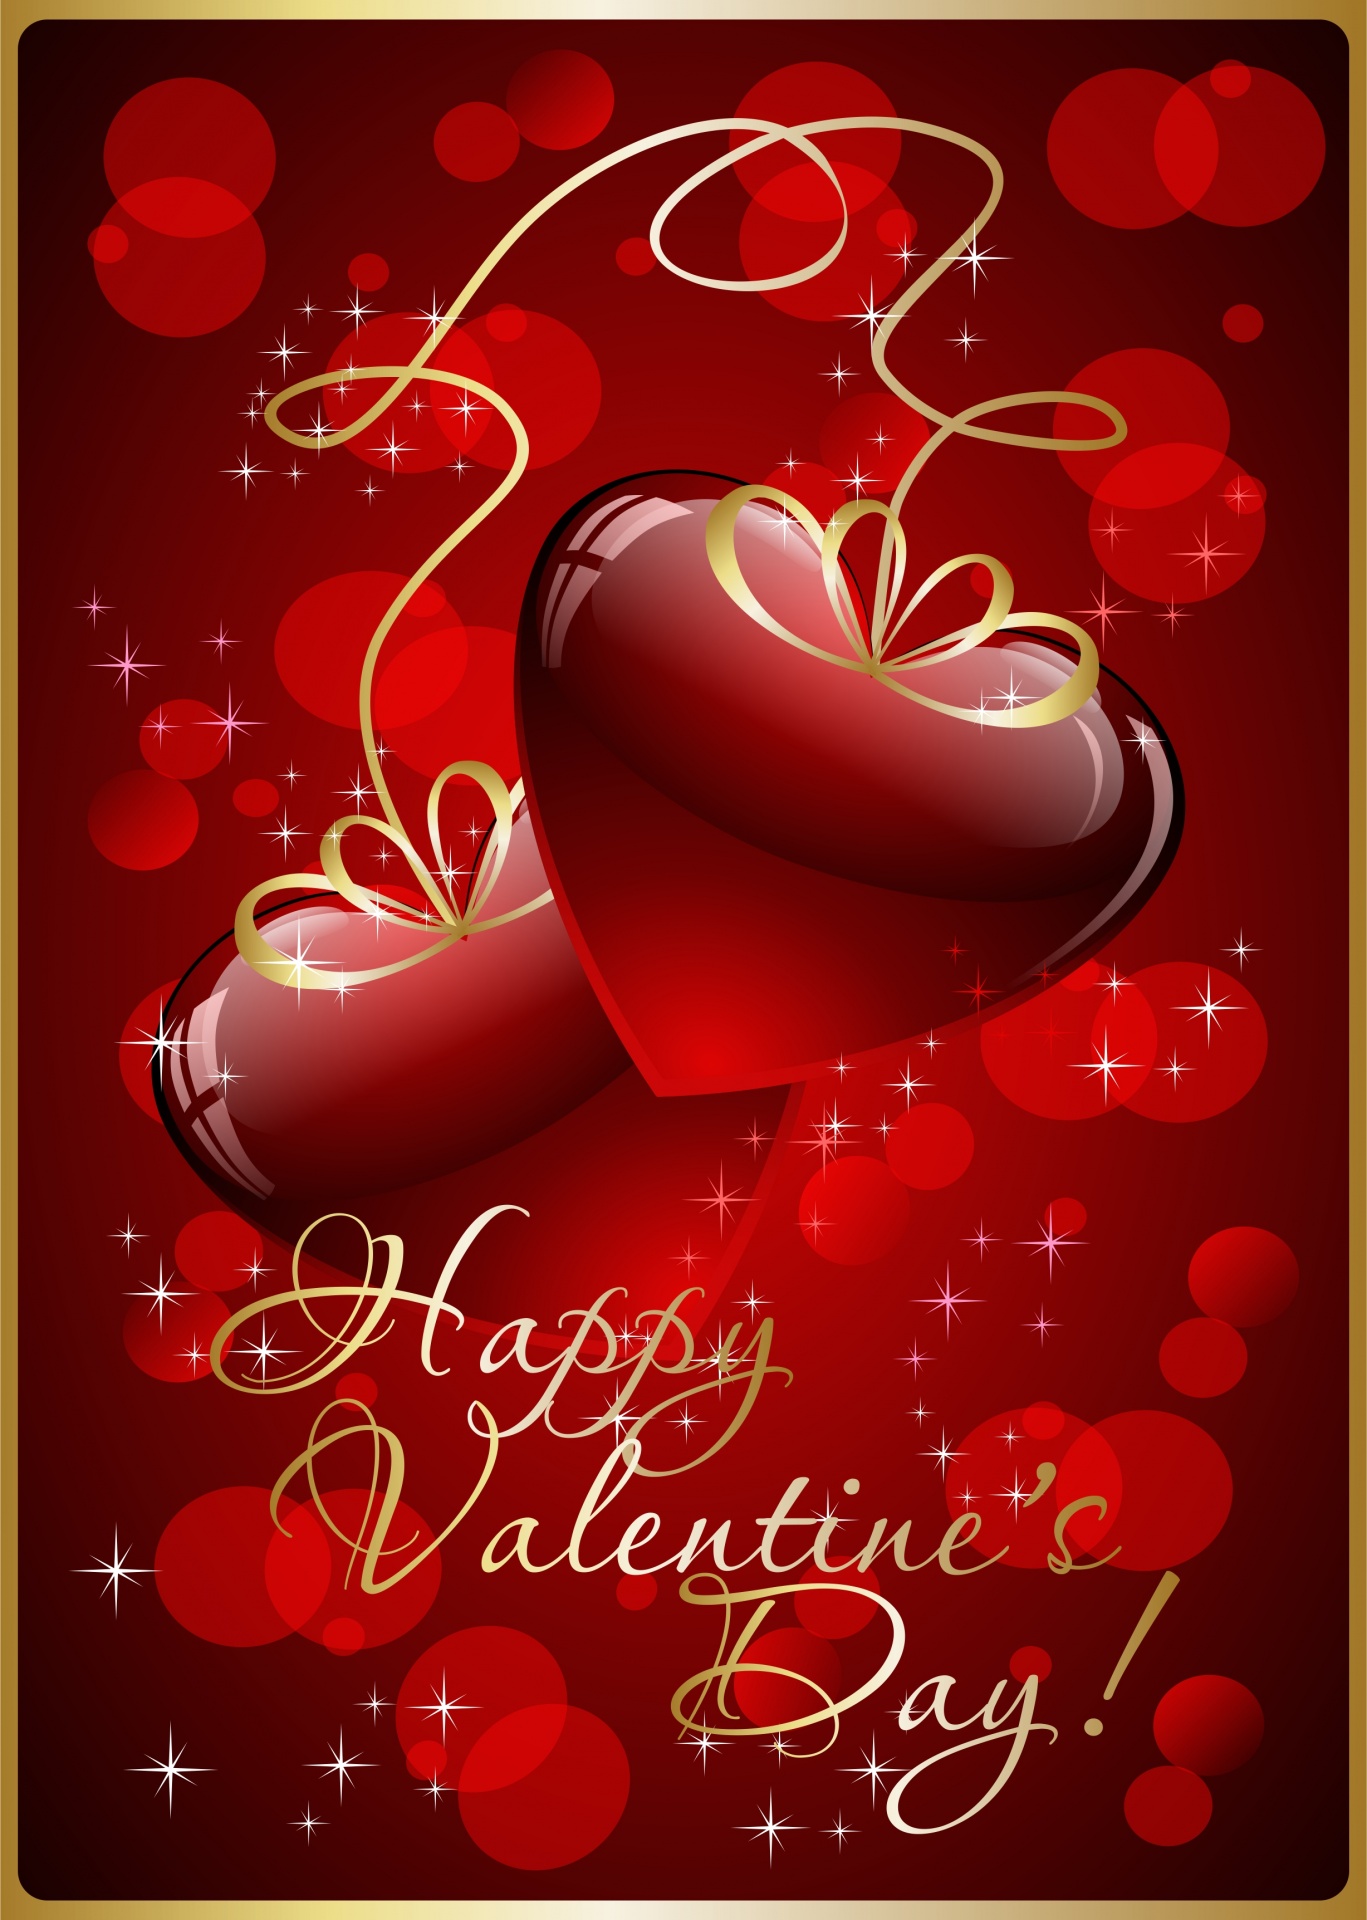 Free Valentine Pictures To Download - Valentines Day Images HD ...